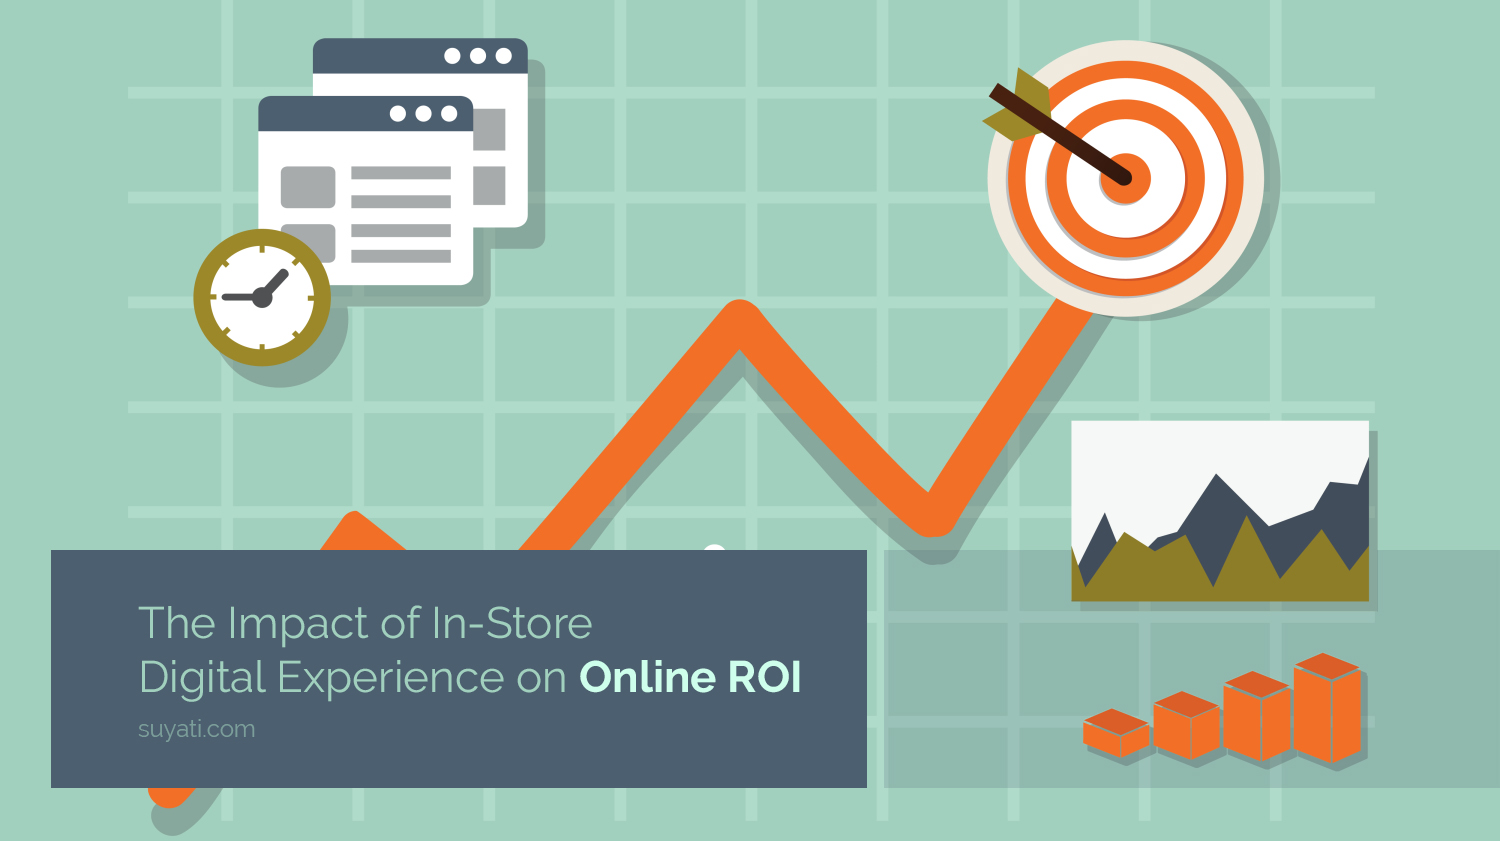 Online ROI benefits with in-store digital experience